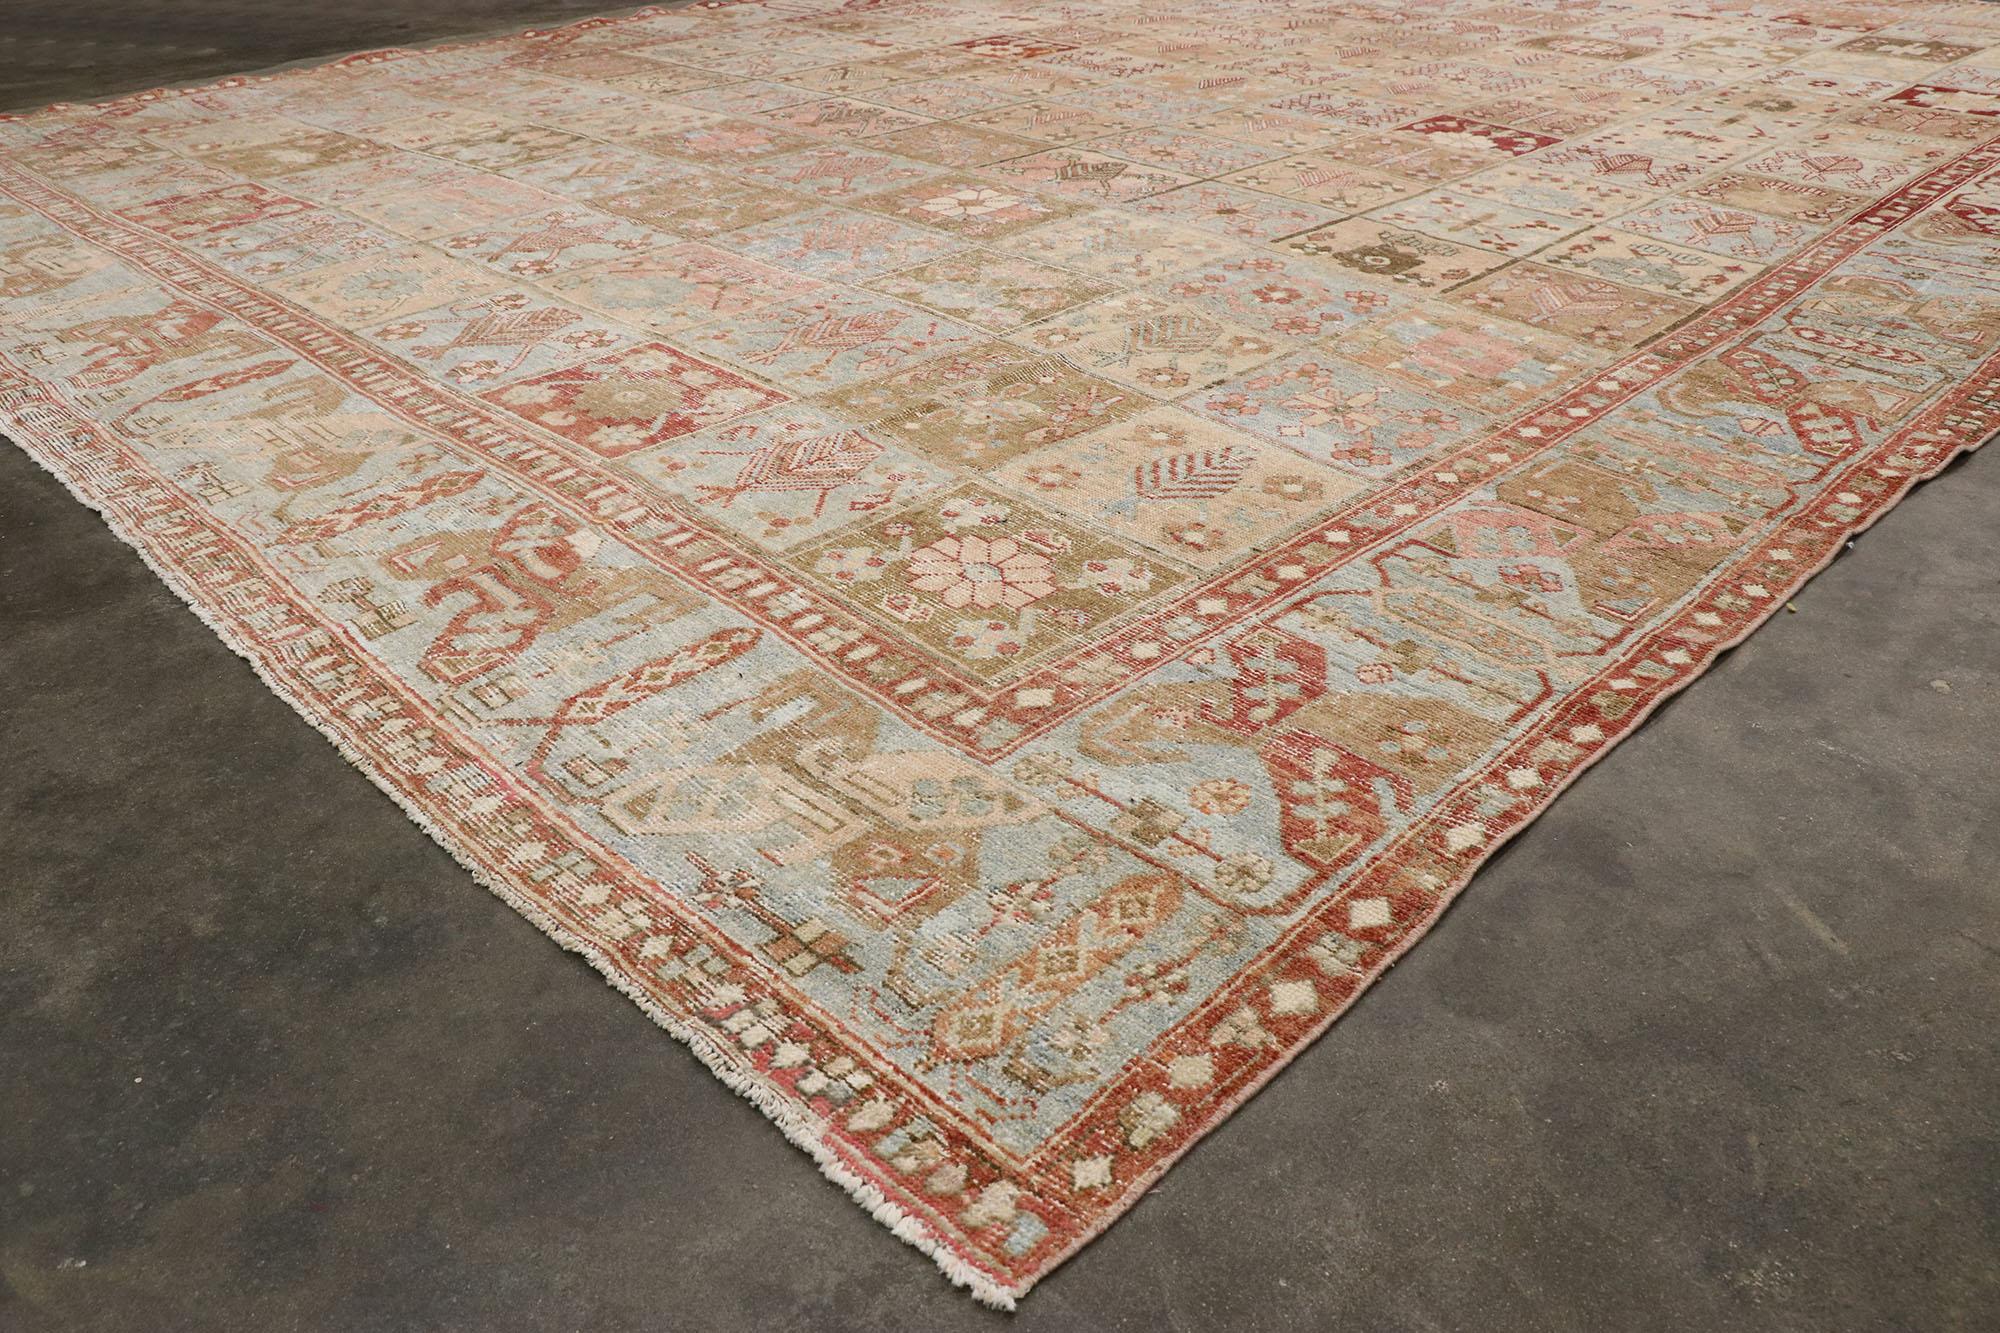 20th Century Distressed Antique Persian Bakhtiari Rug with Modern French Rustic Style